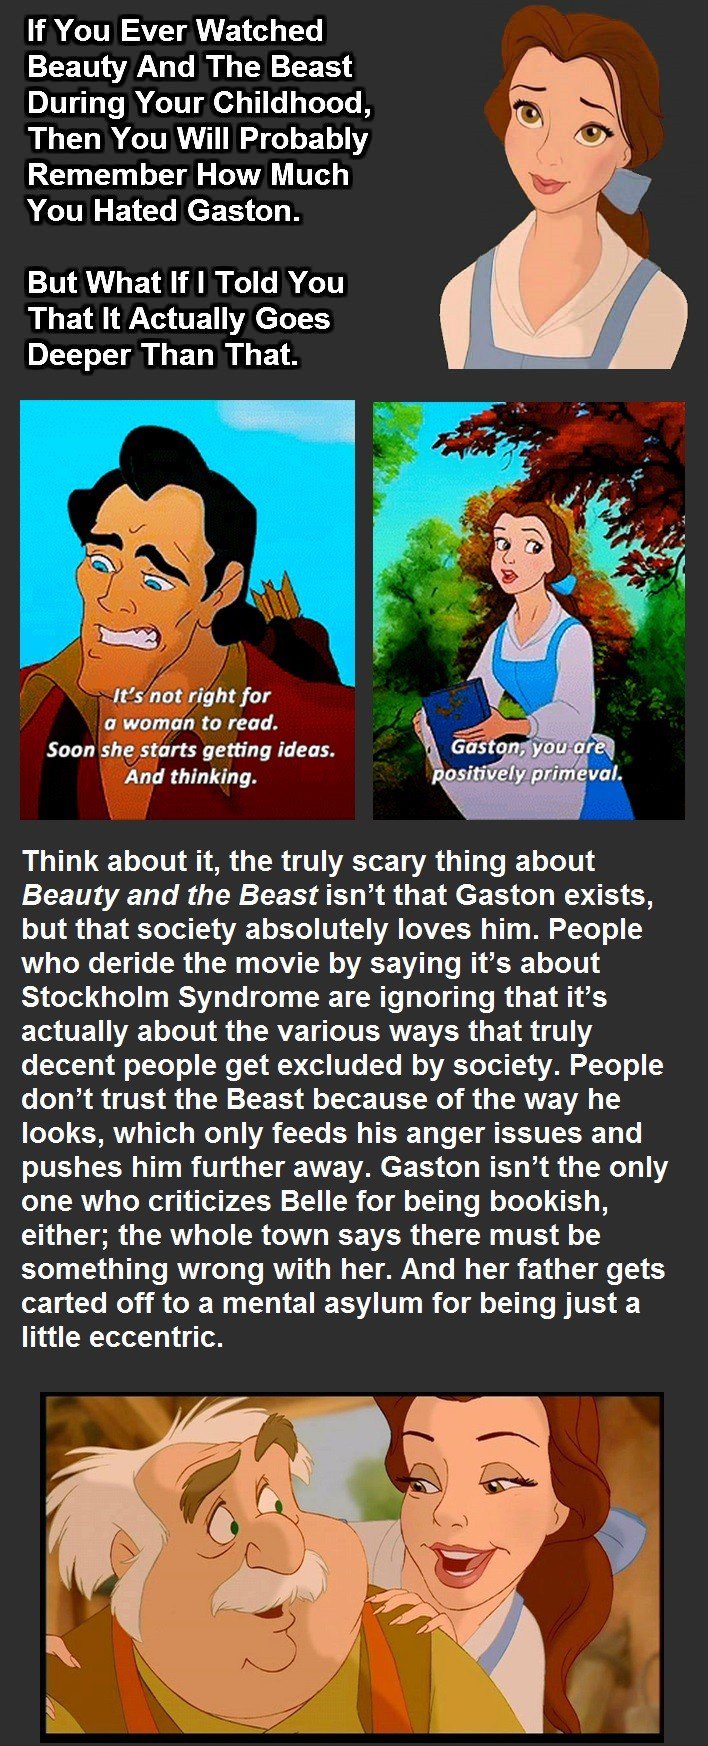 this guy just changed the way we see beauty and the beast